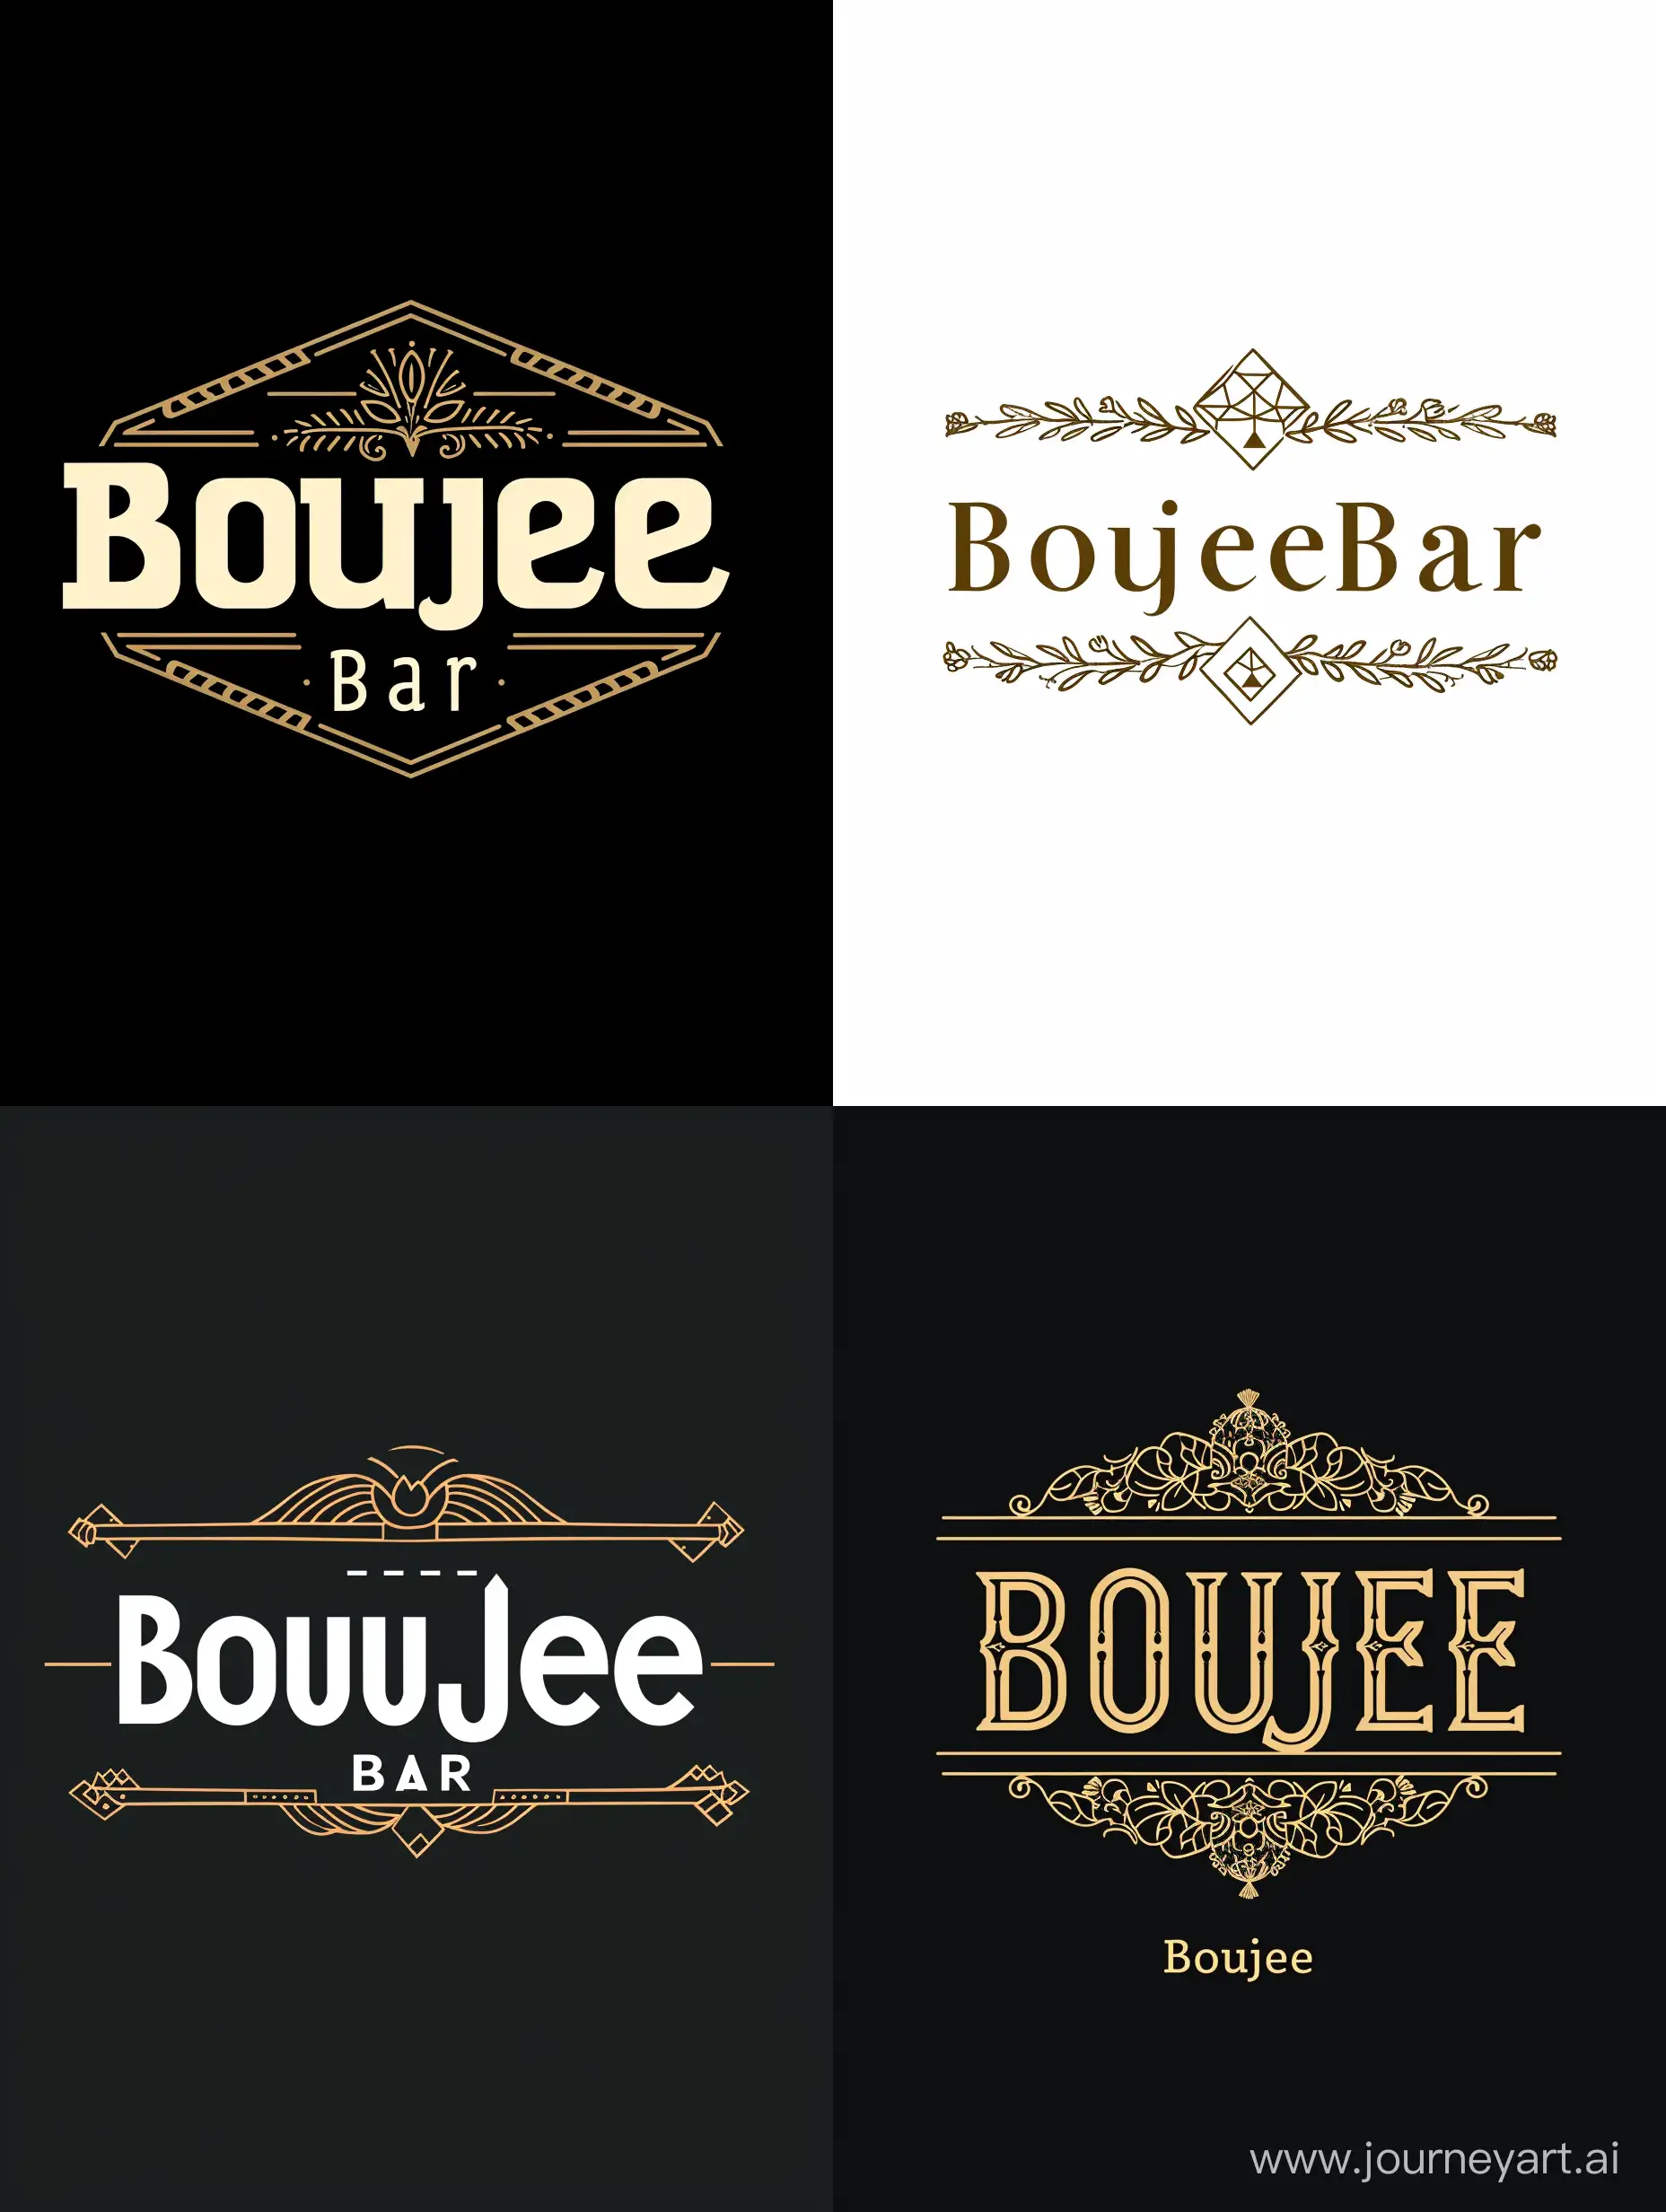 Create a logo with the text “Boujee Bar”